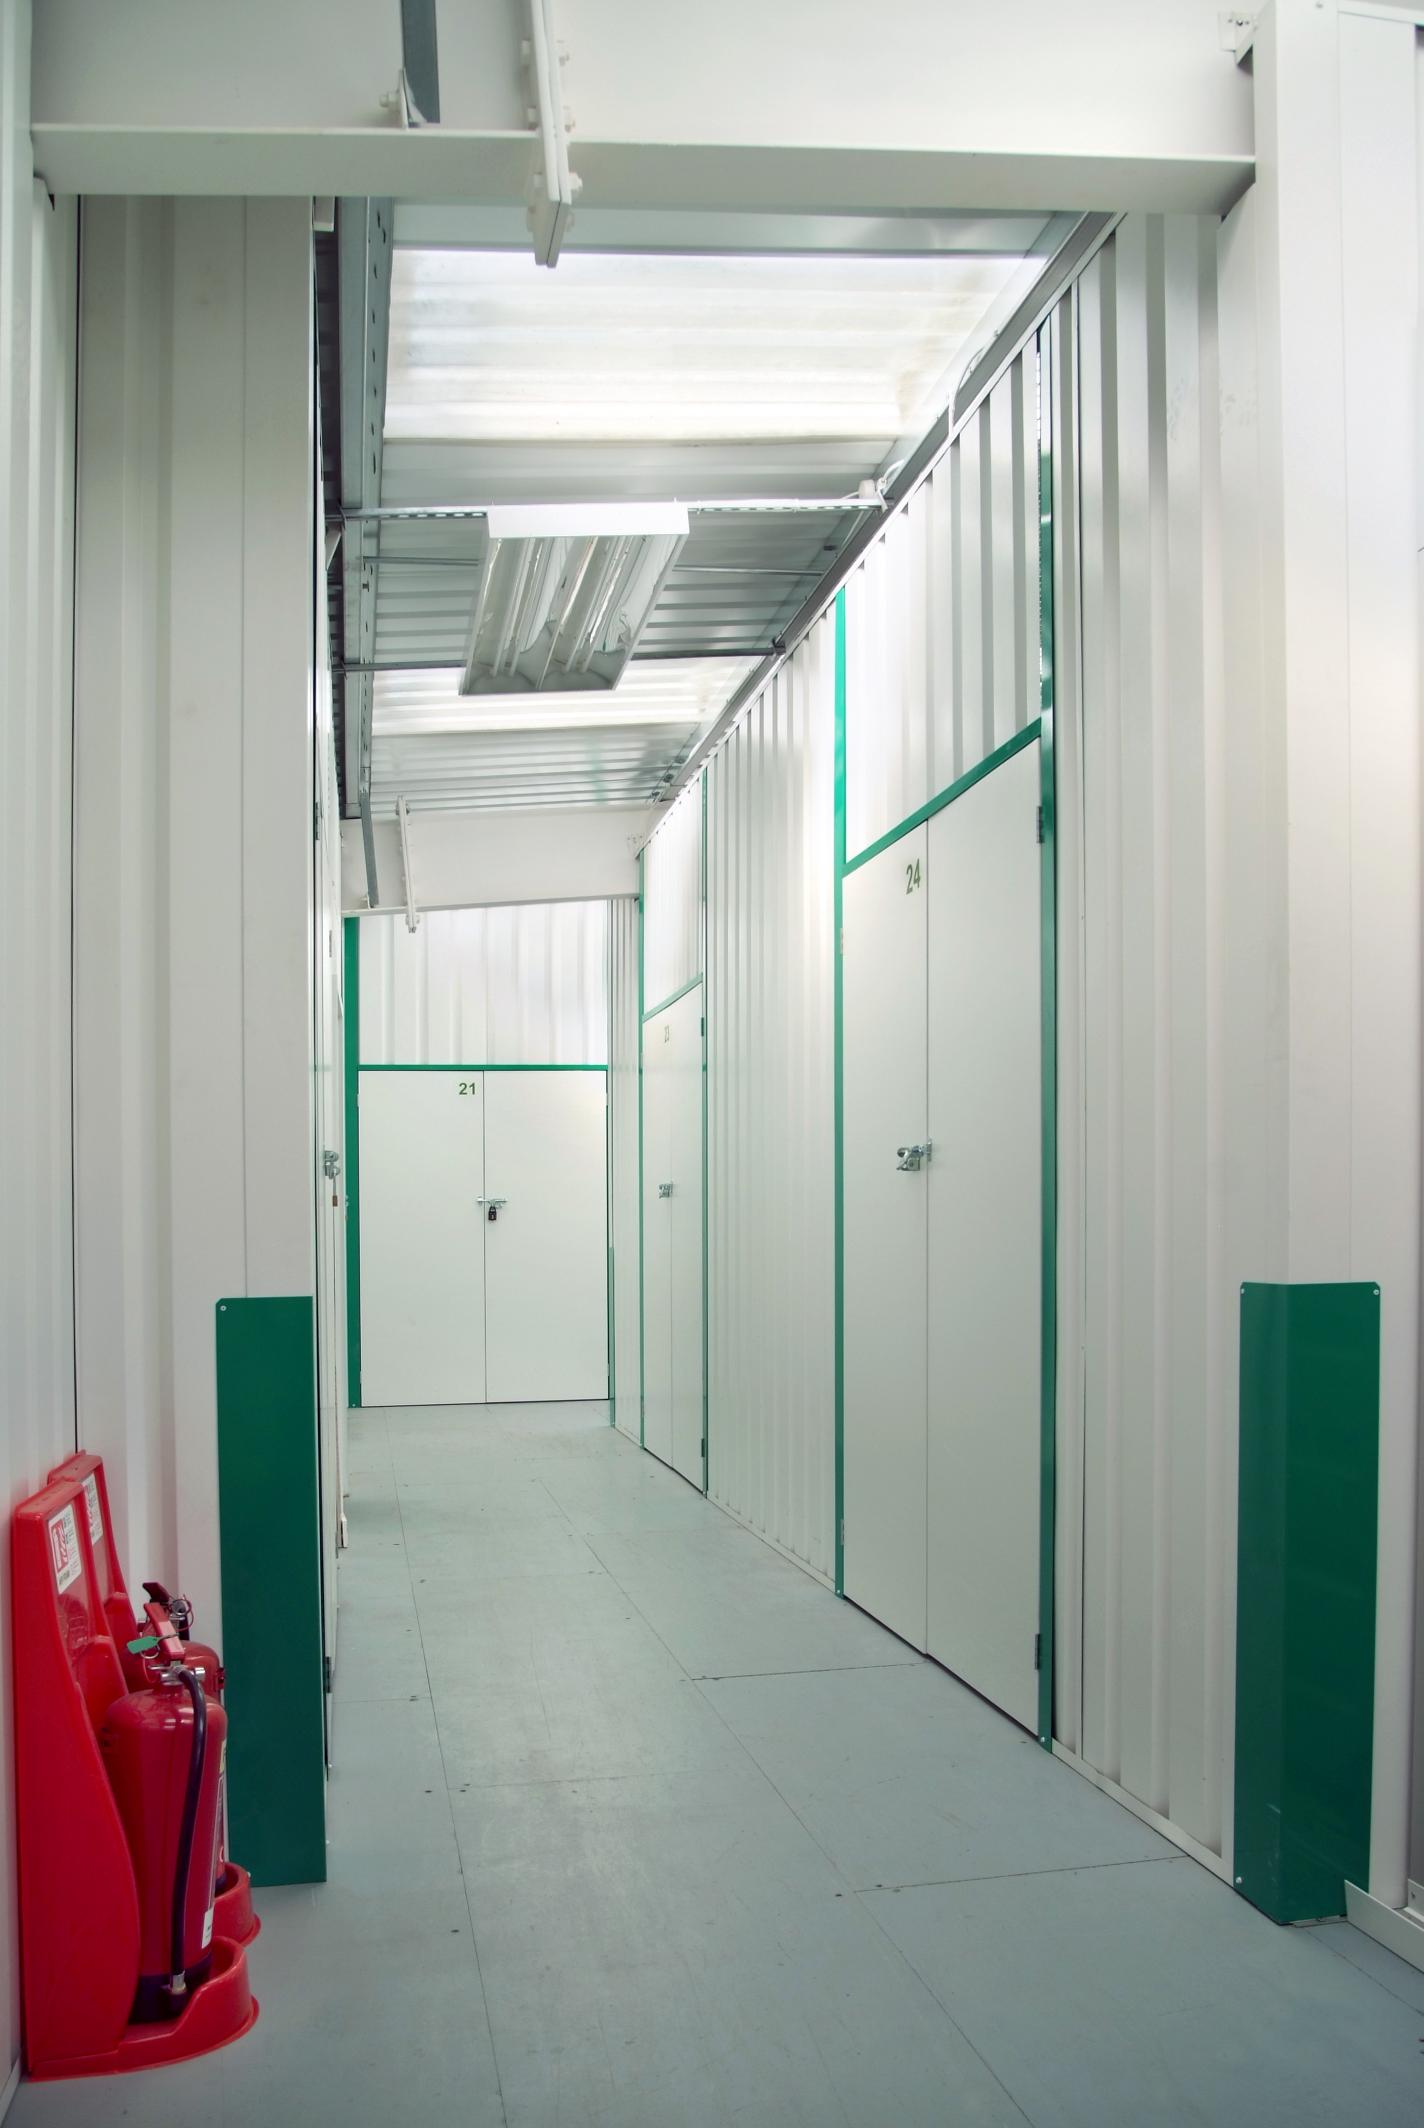 Hallway with metal storage unit doors and labeled rooms. A fire extinguisher and fire hose are mounted on the left wall.